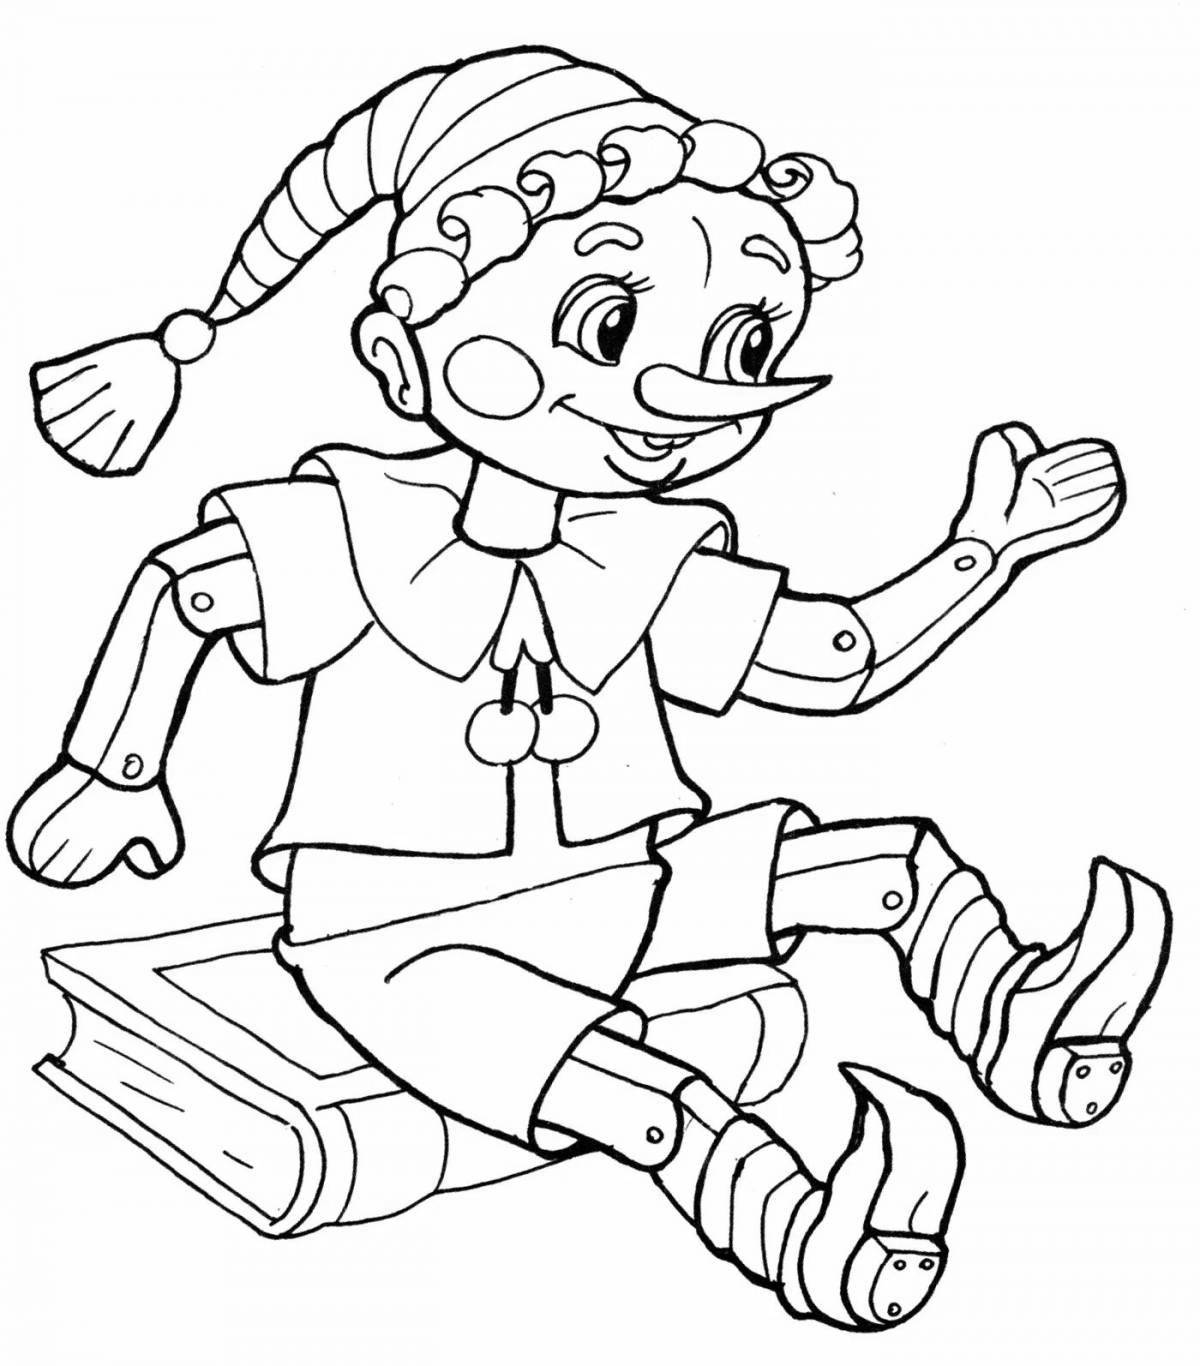 Animated drawing of pinocchio